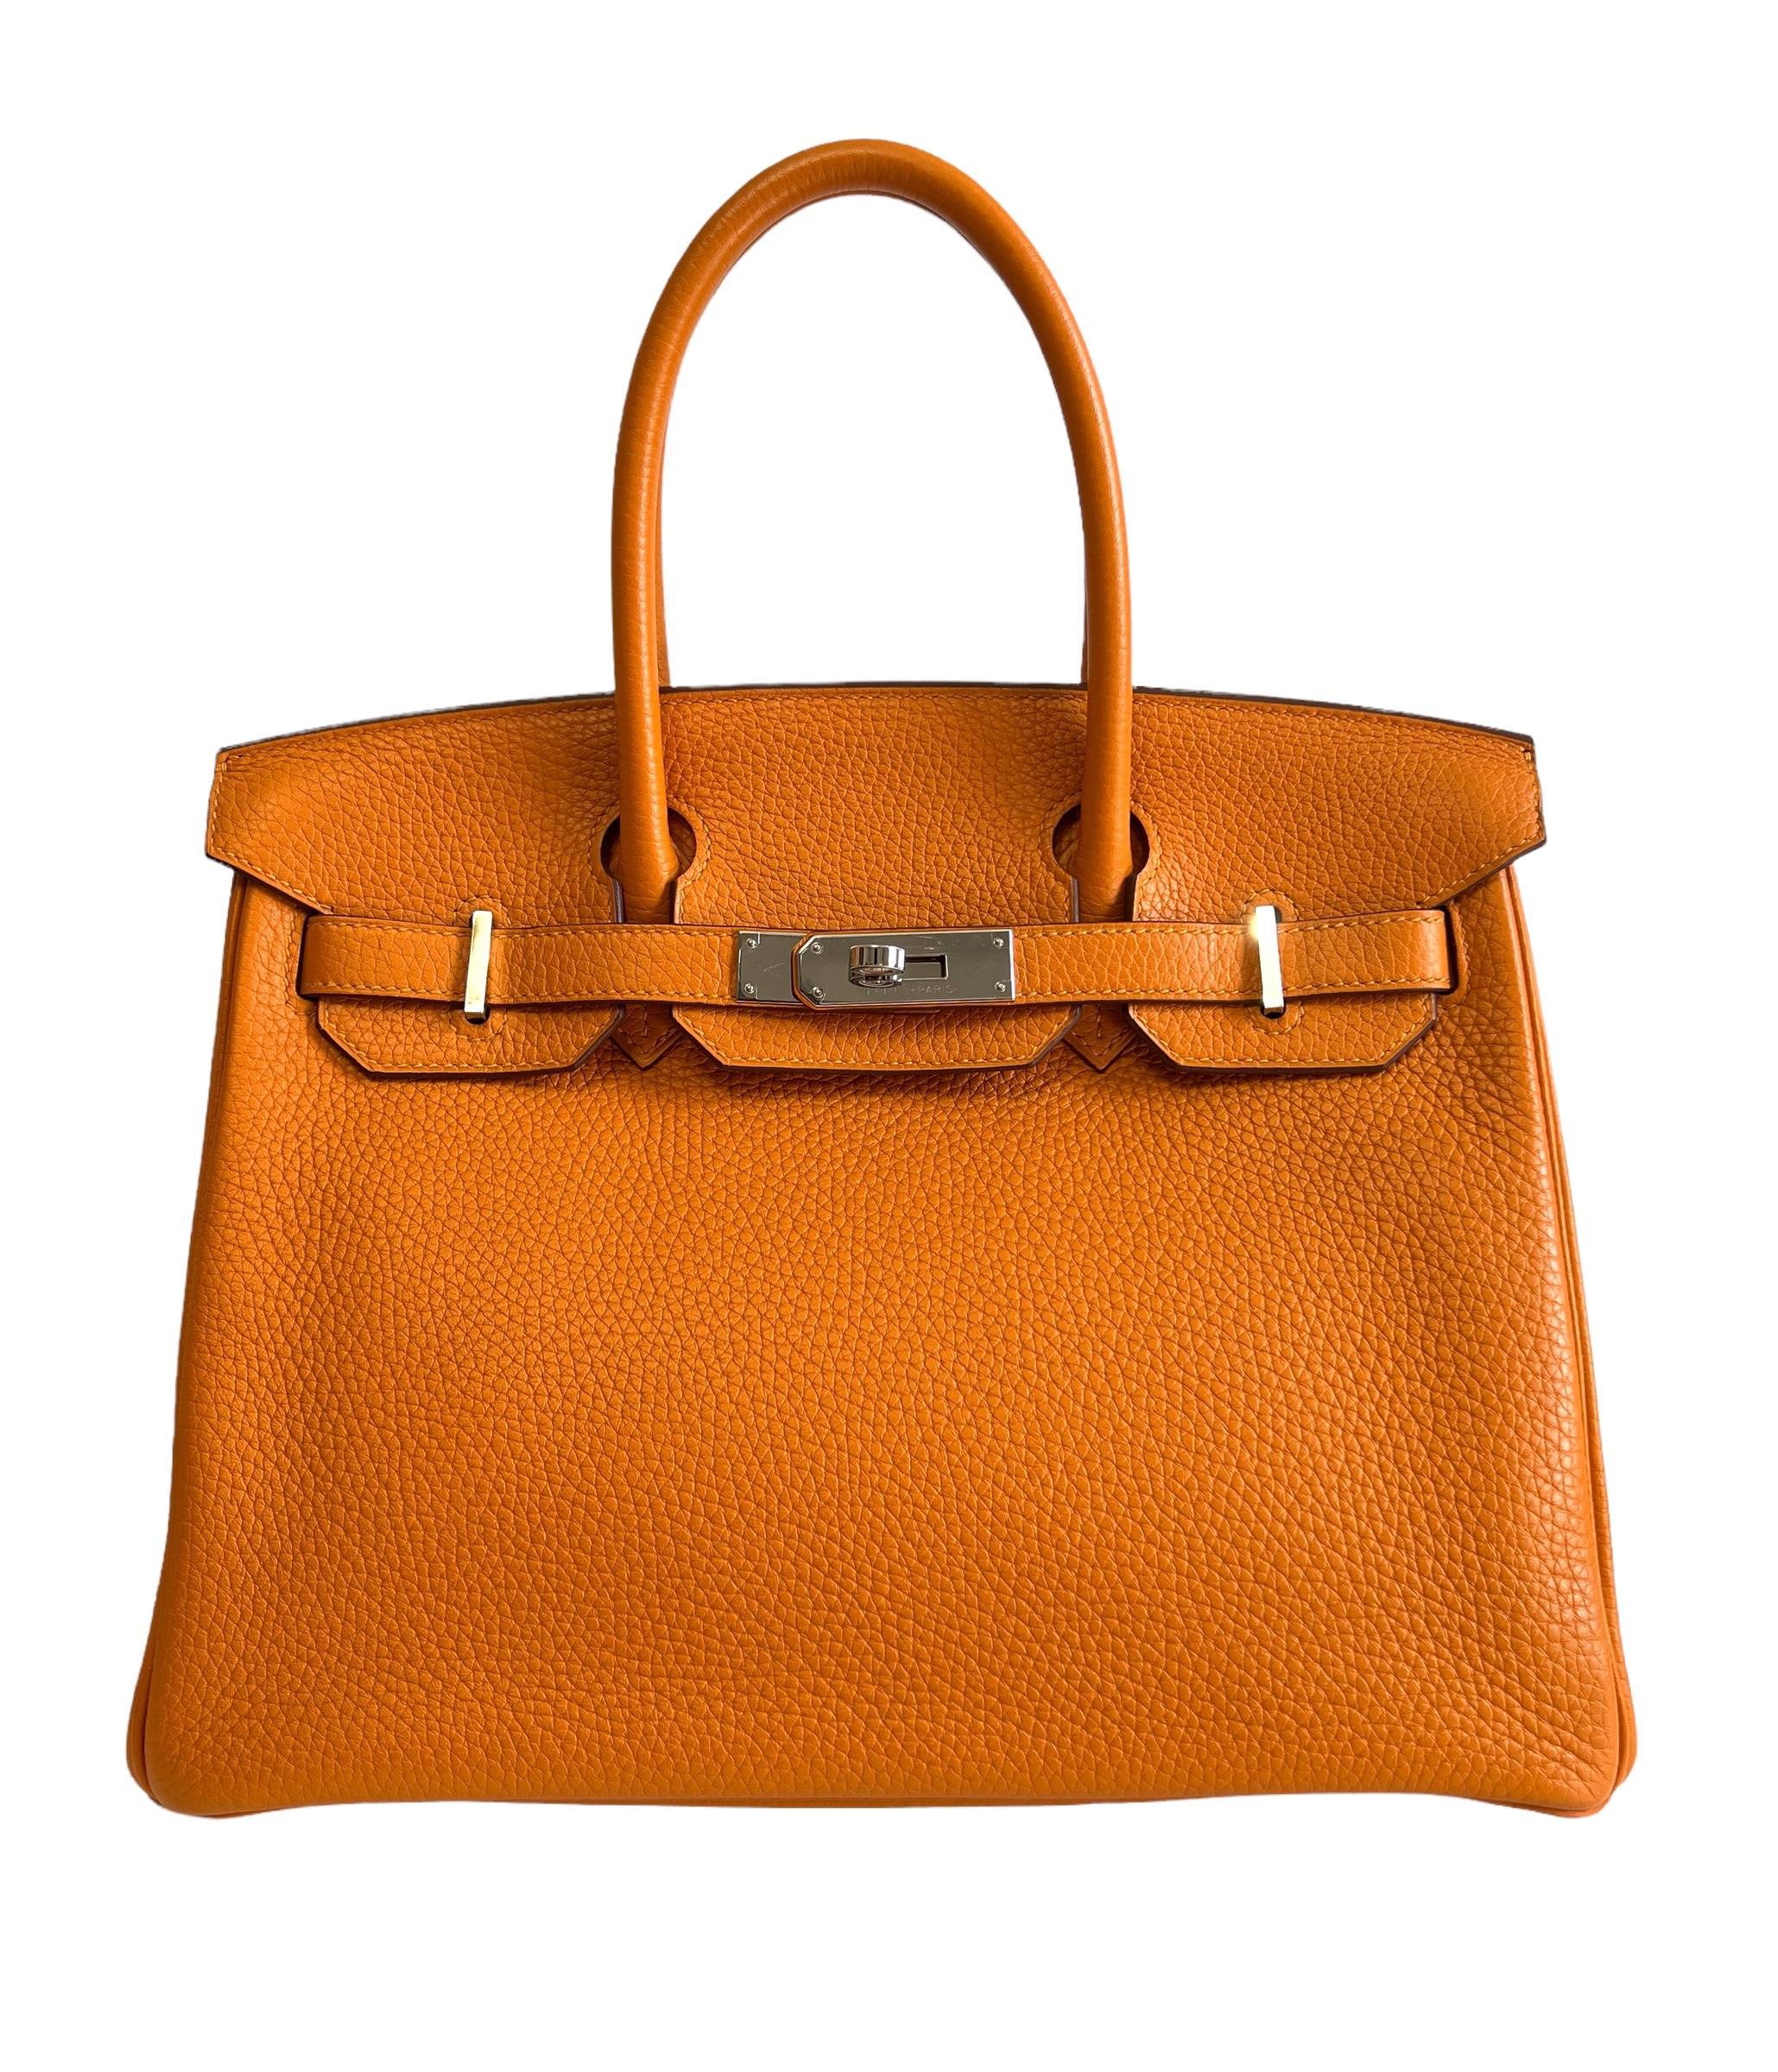 Beautiful Hermes Birkin 30 Abricot “Apricot” Orange complimented by Palladium Hardware. Pristine condition with plastic on hardware. Excellent corners and structure. 
2018 C Stamp. 

Shop with Confidence from Lux Addicts. Authenticity Guaranteed! 